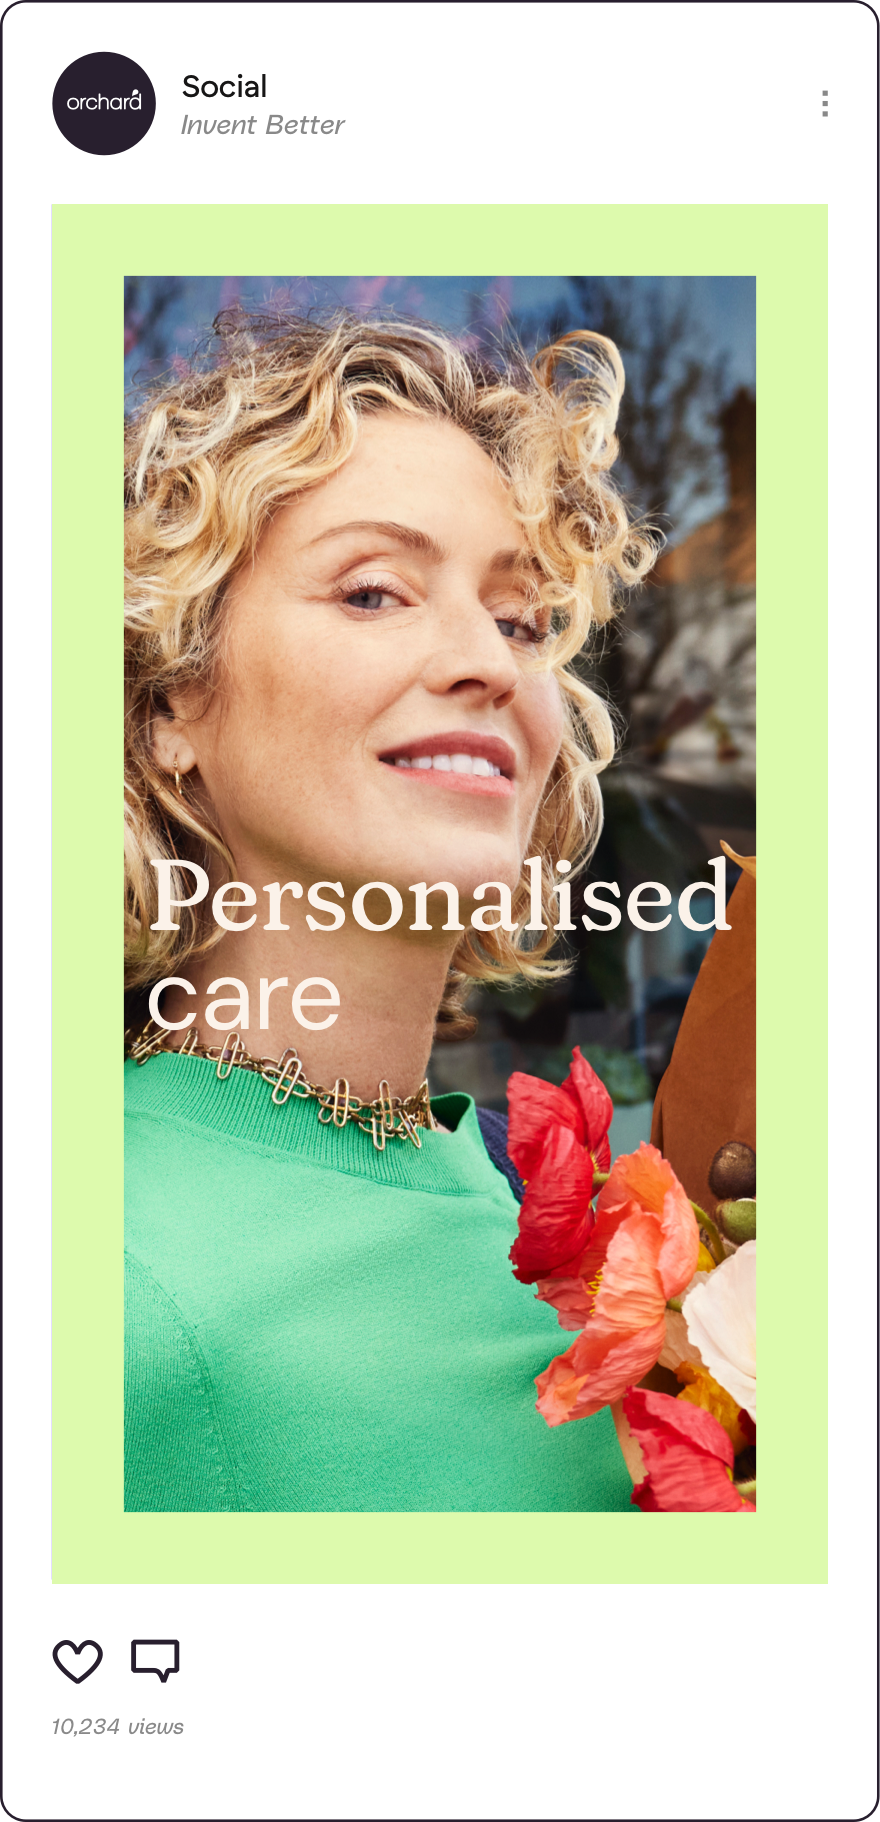 Social media ad for personalized care by Clear Skincare